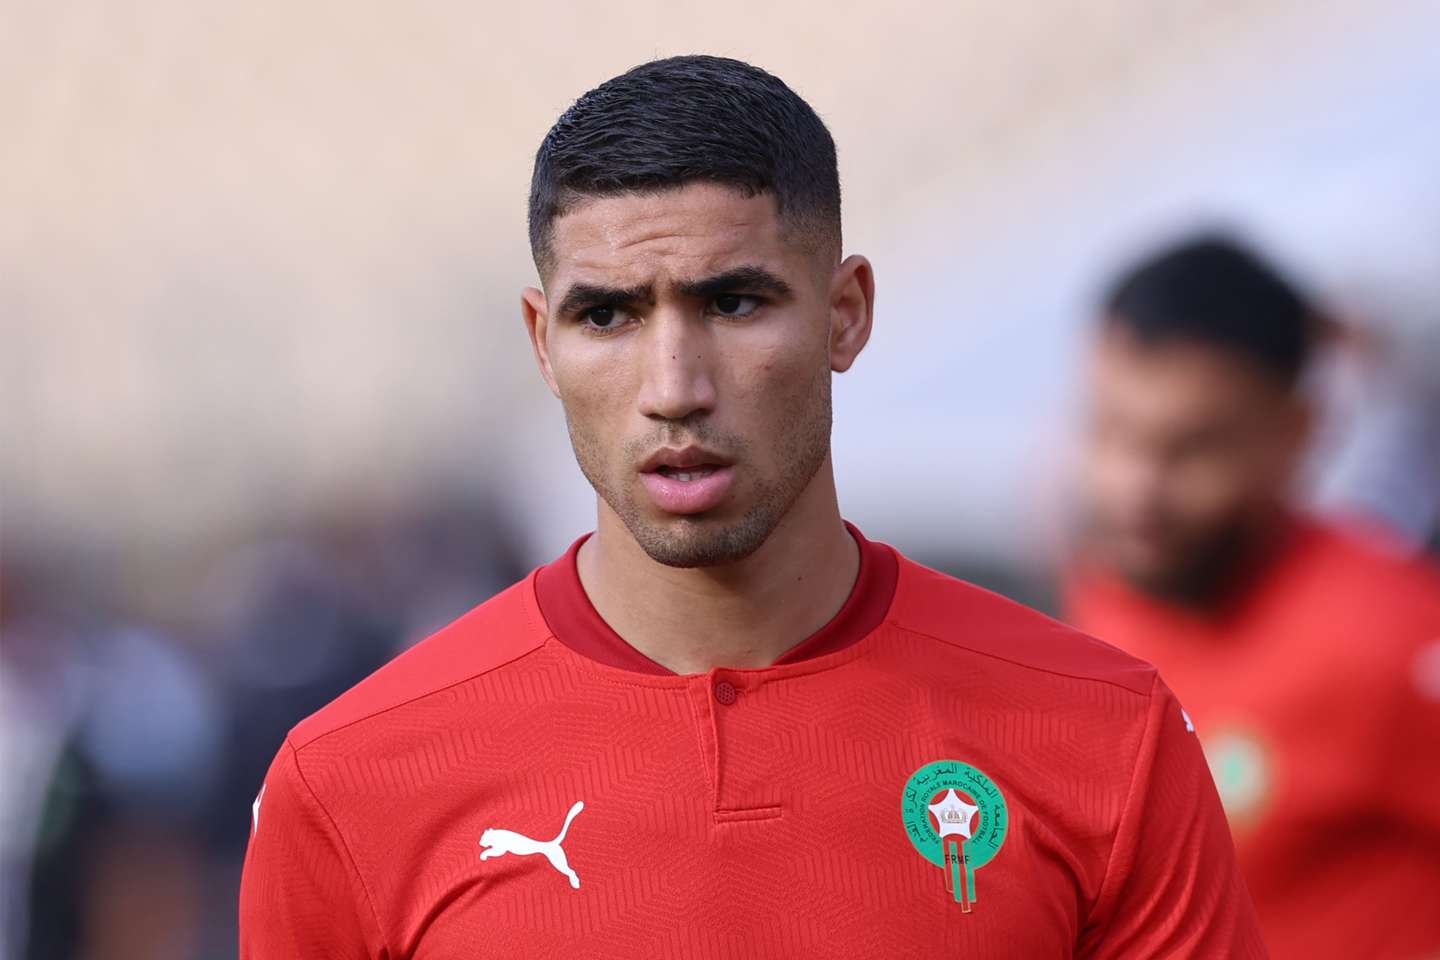 PSG's Achraf Hakimi charged with rape by French prosecutors